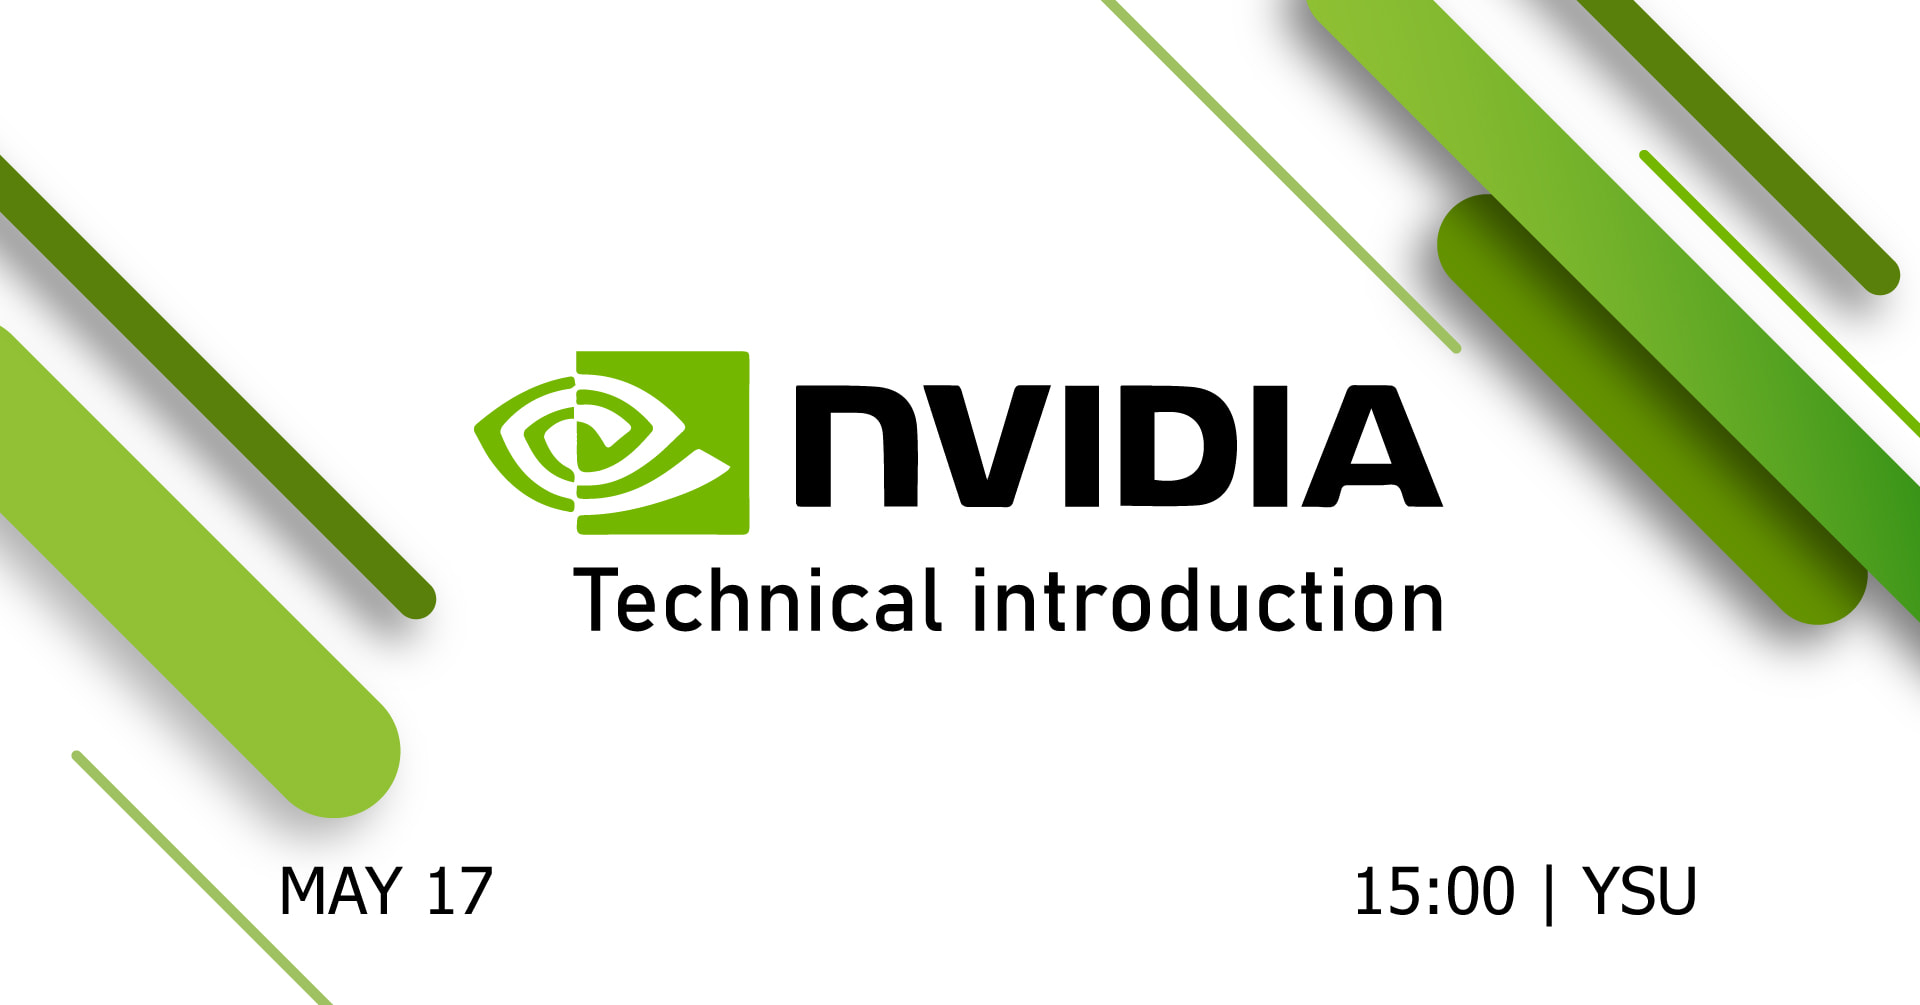 Technical introduction to NVIDIA at YSU